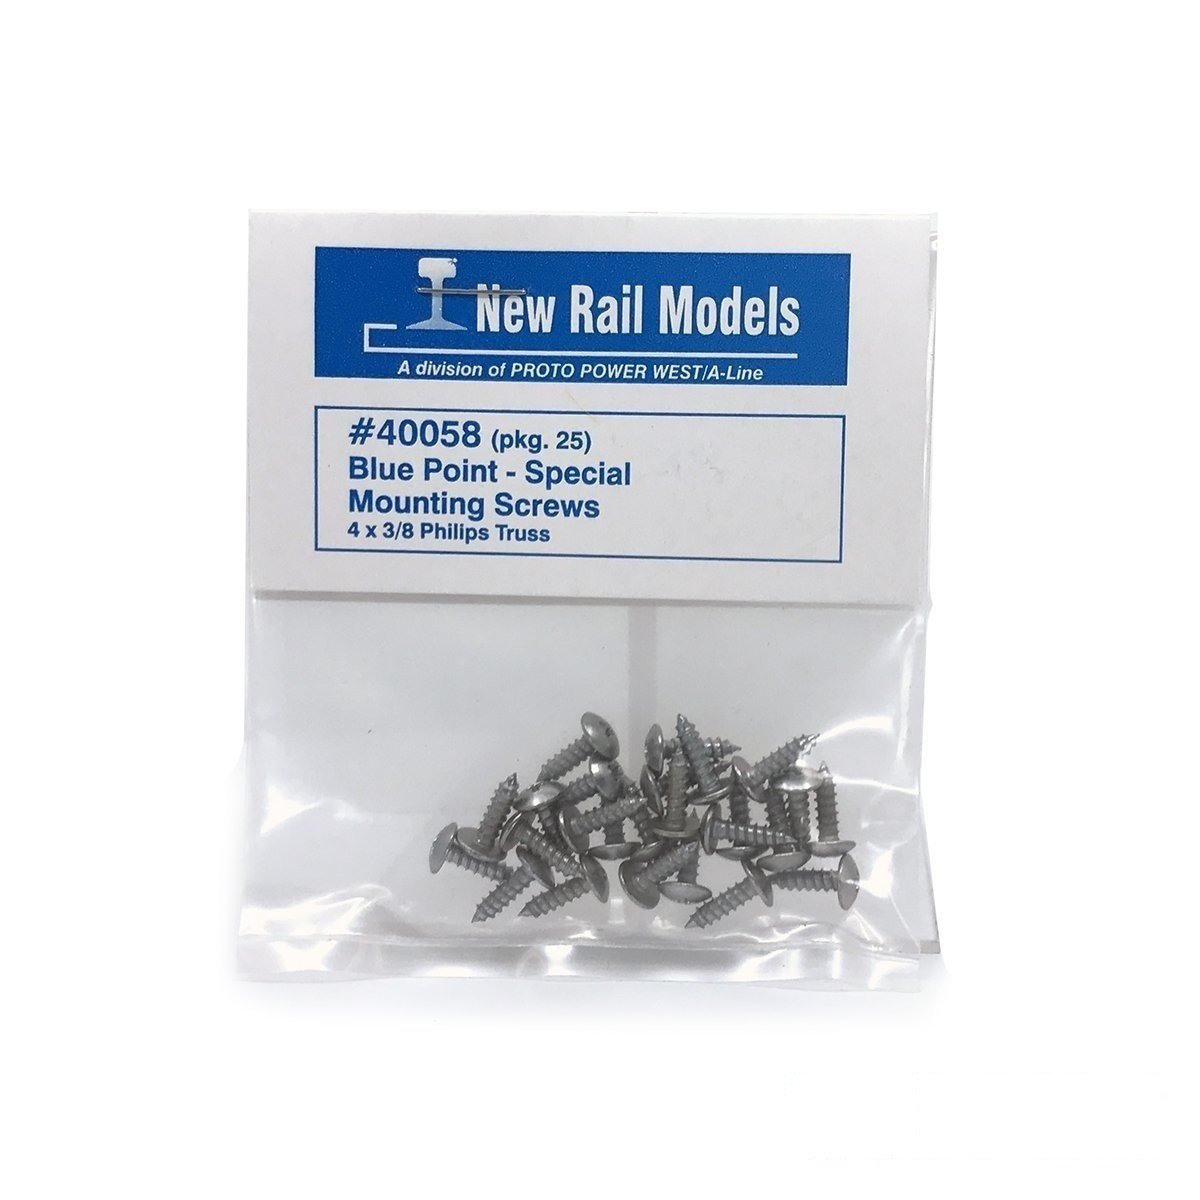 New Rail Models 40058 BLUE POINT MOUNTING SCREWS